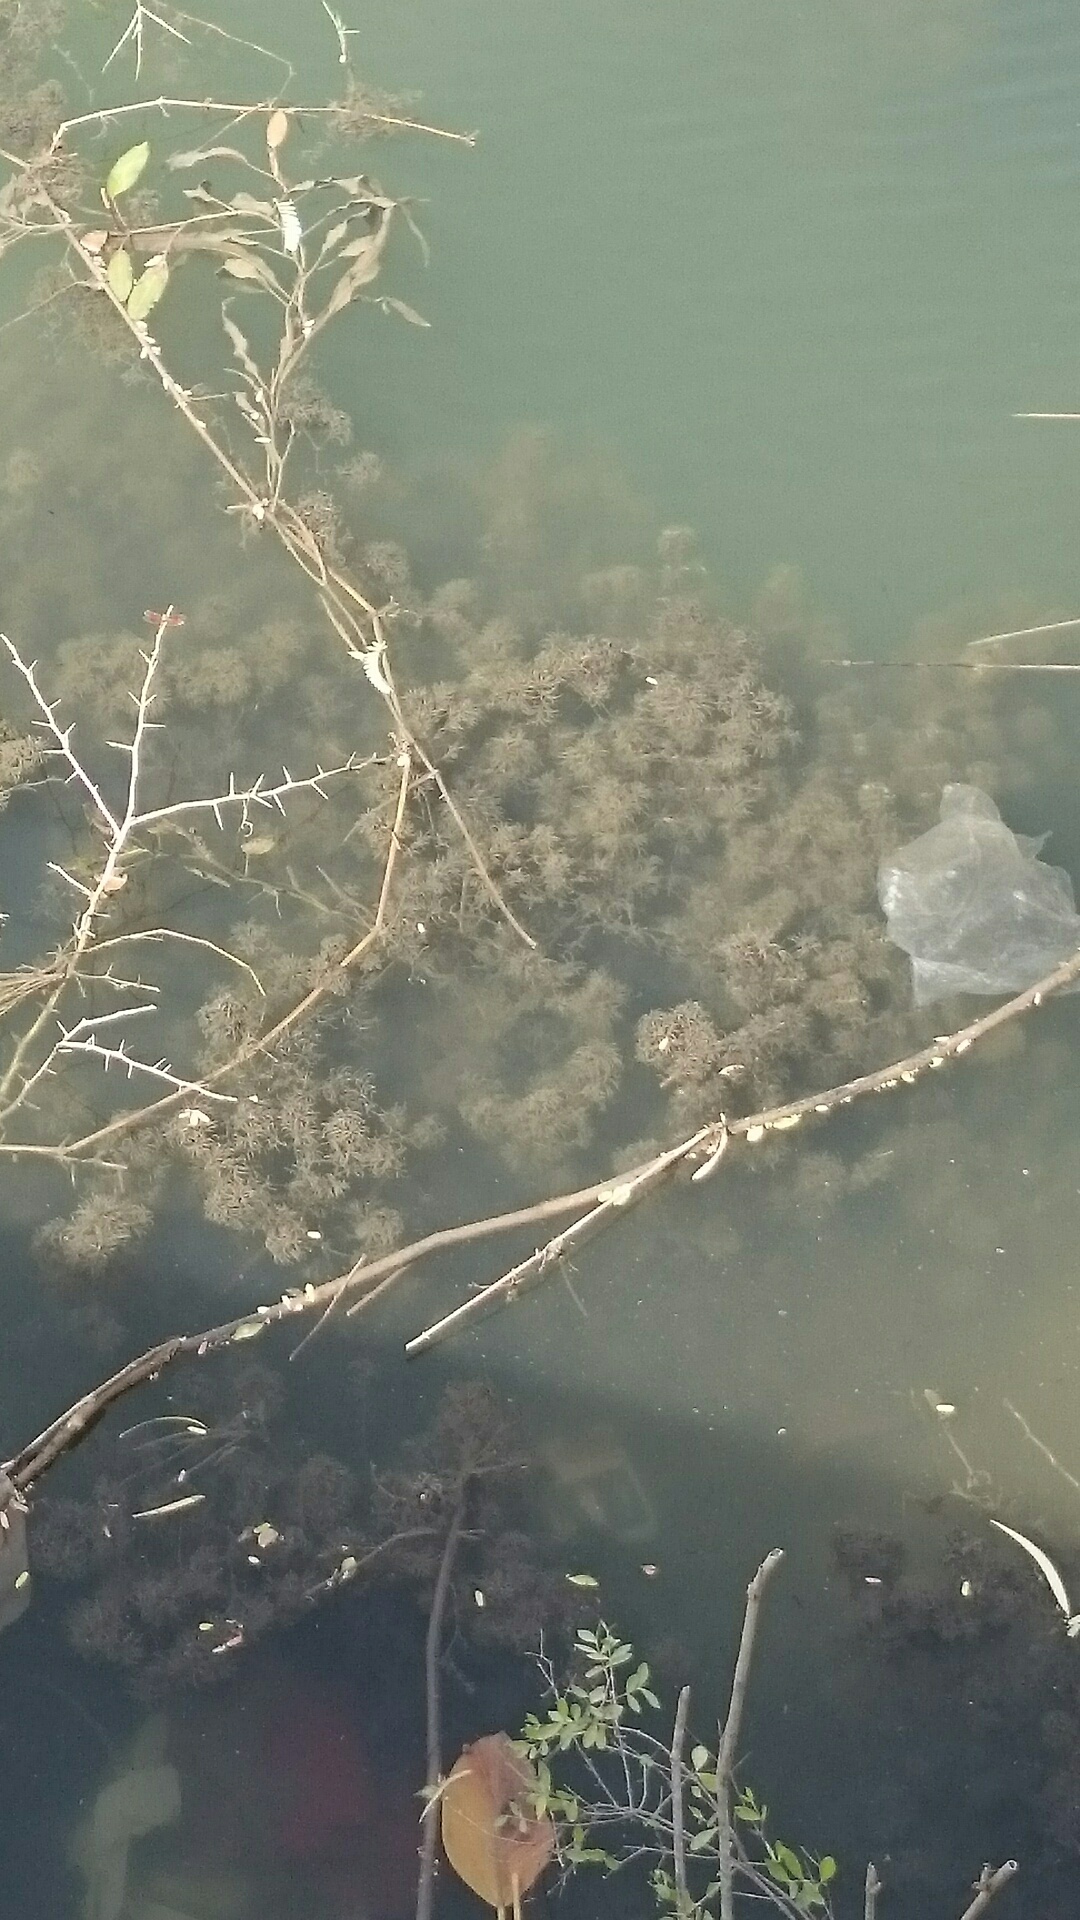 Help us identify these ​weeds and algae.